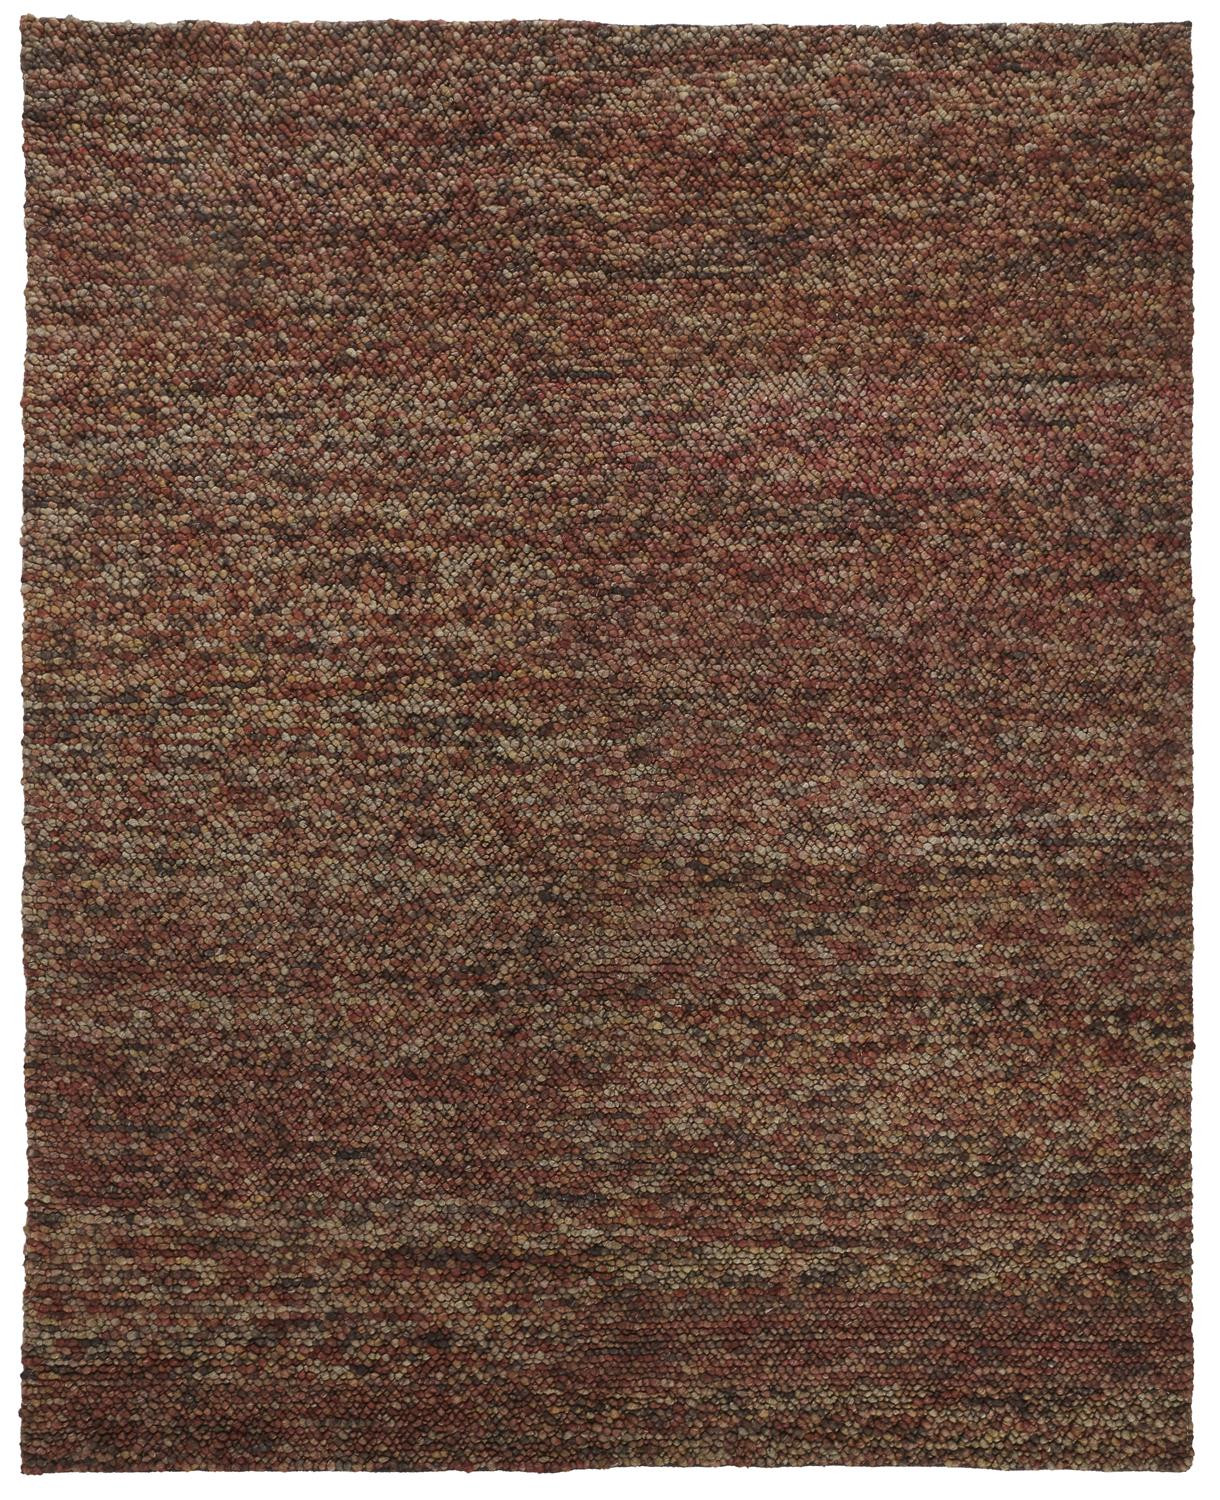 5' X 8' Brown Orange And Red Wool Hand Woven Distressed Stain Resistant Area Rug-515289-1